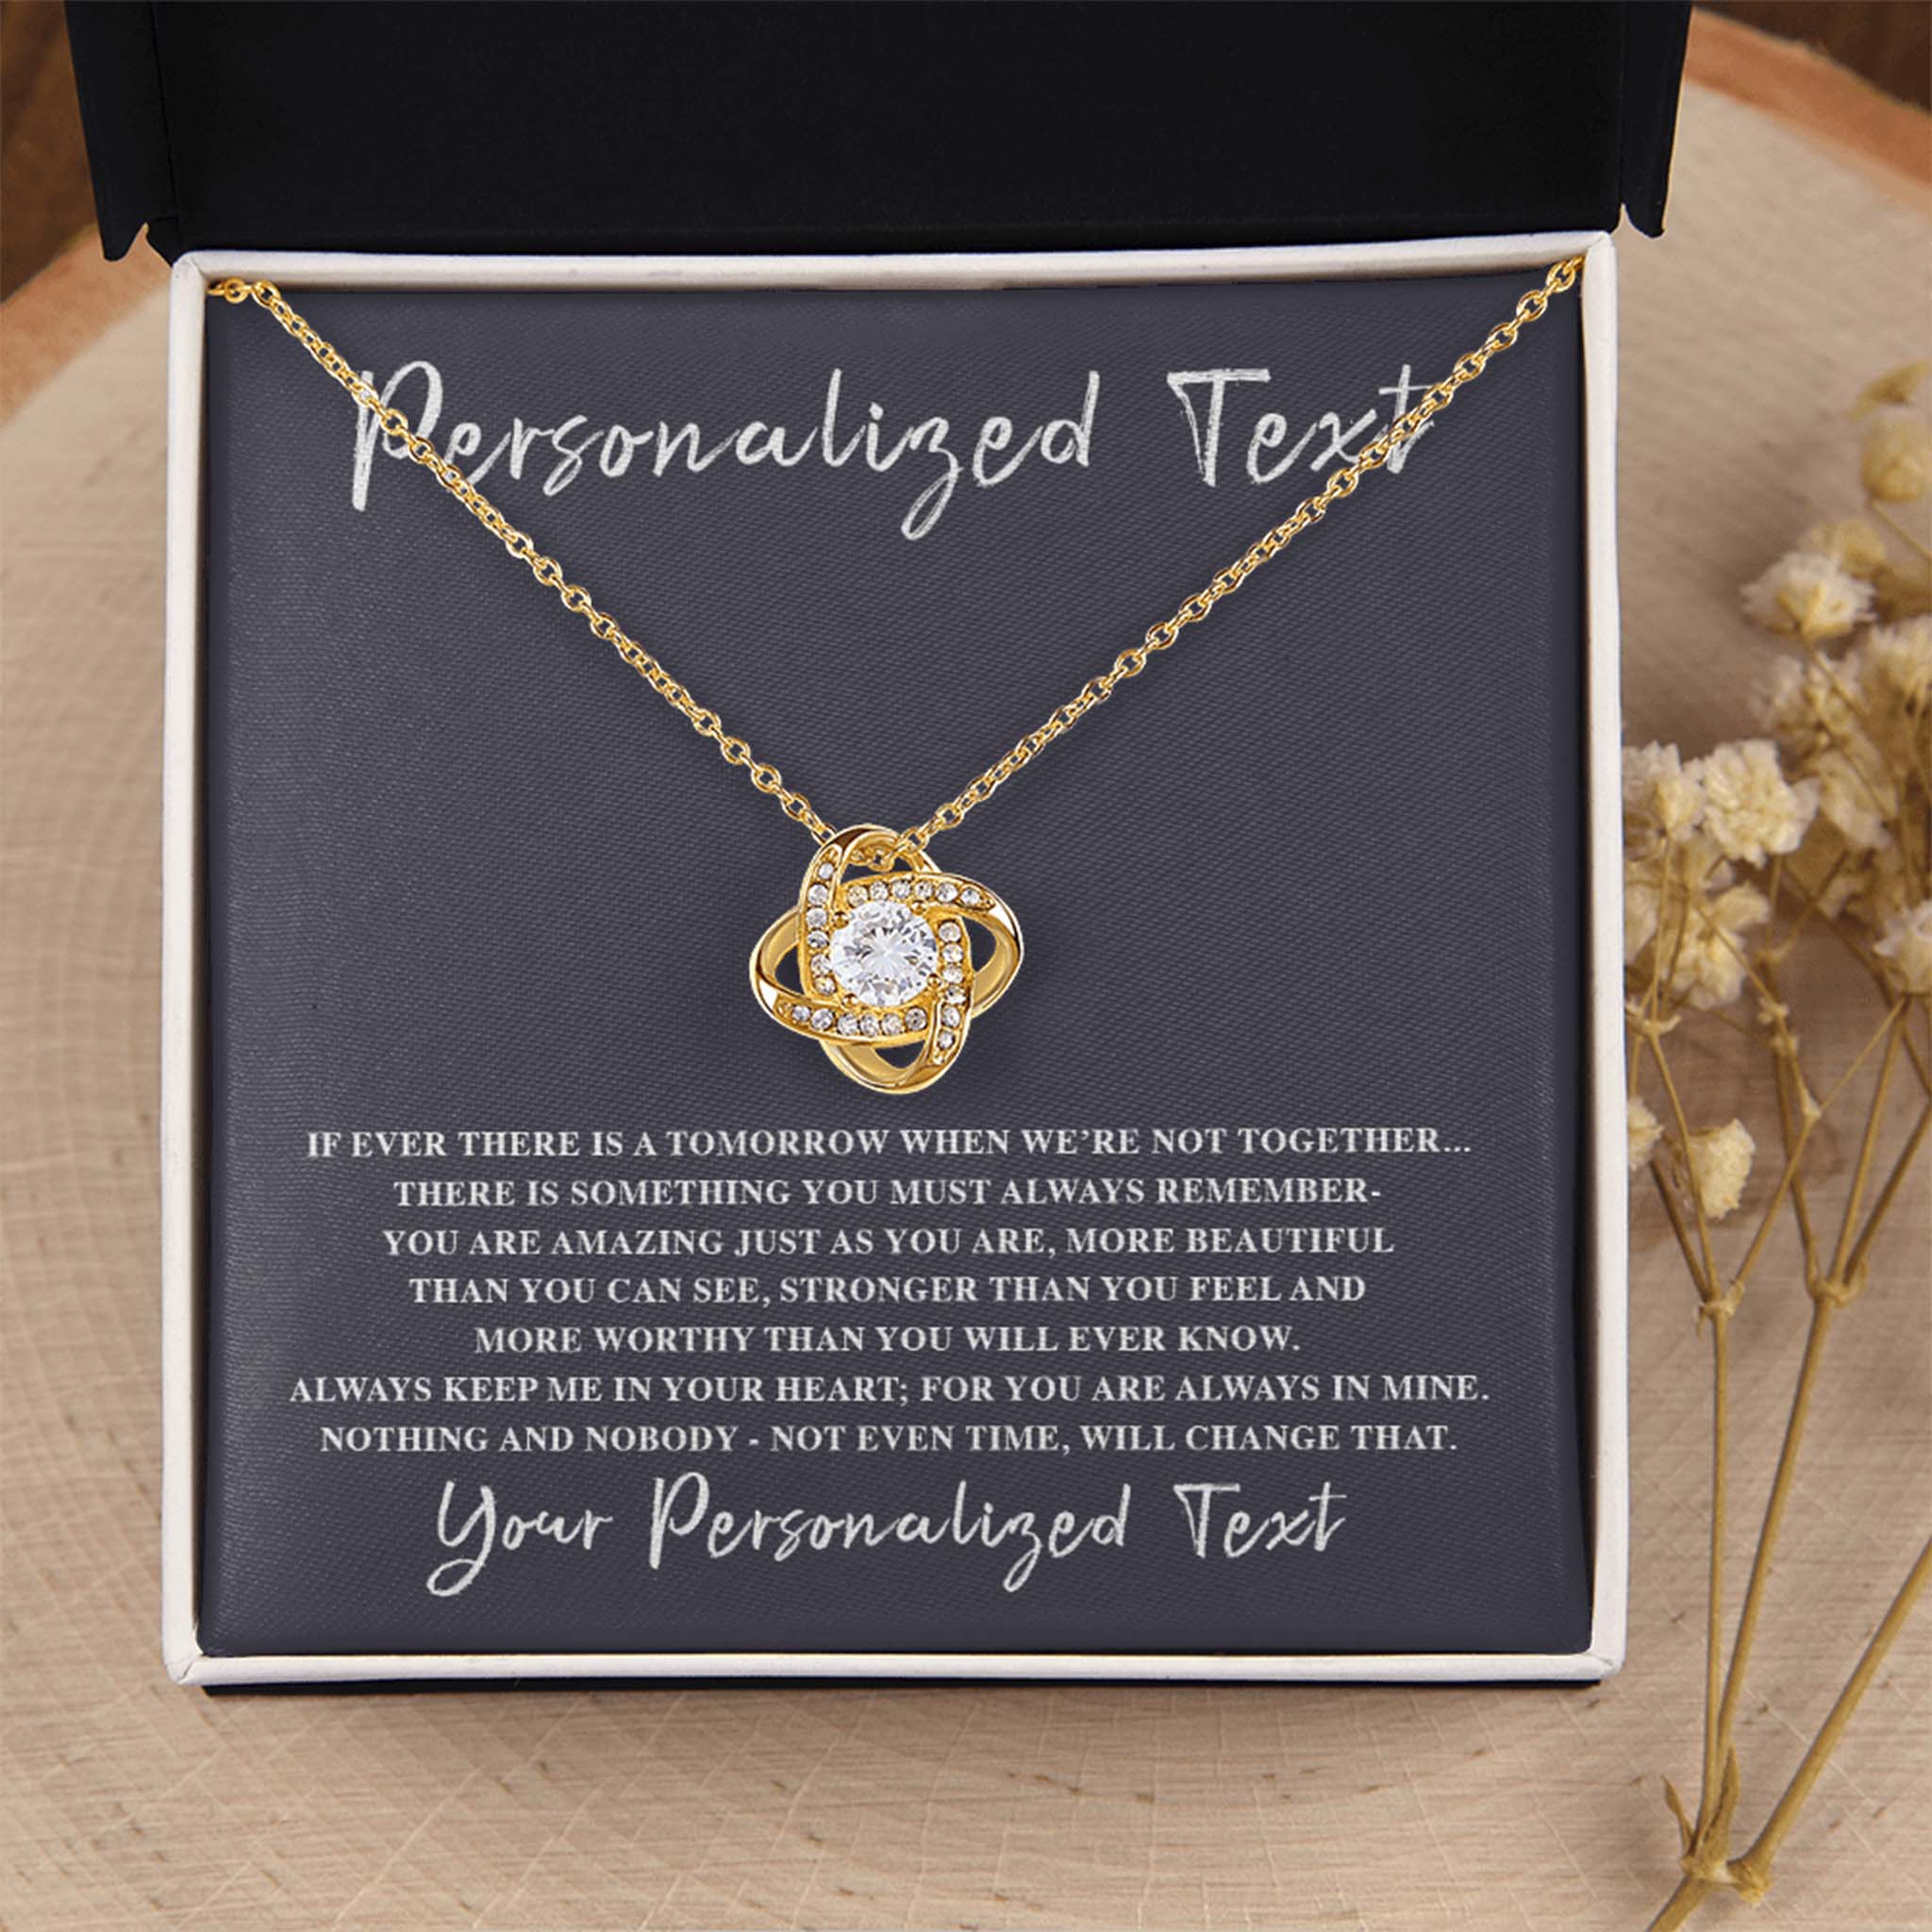 Love Knot Necklace If Ever There Is a Tomorrow - Love Personalized Insert CardCustomly Gifts